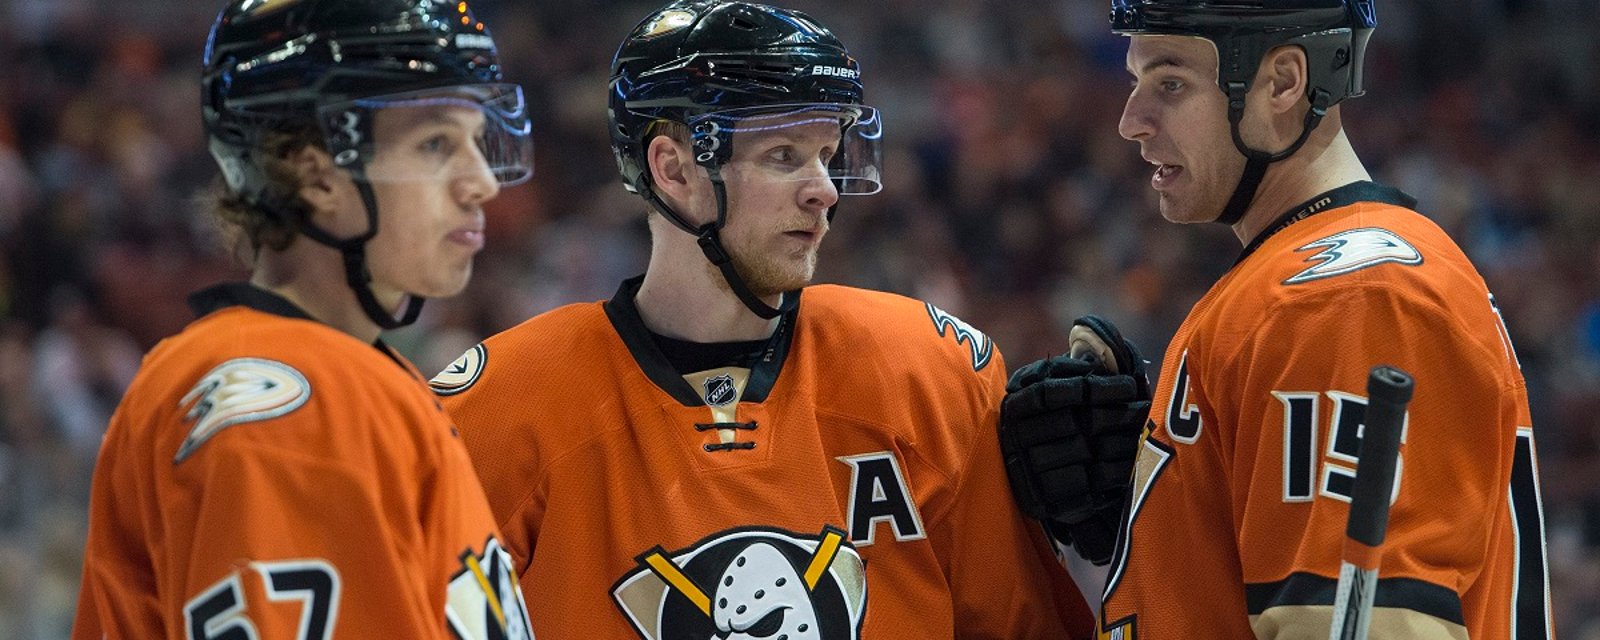 Rumor: Ducks offseason could include a “nuclear” trade after failing to reach the Cup Final.